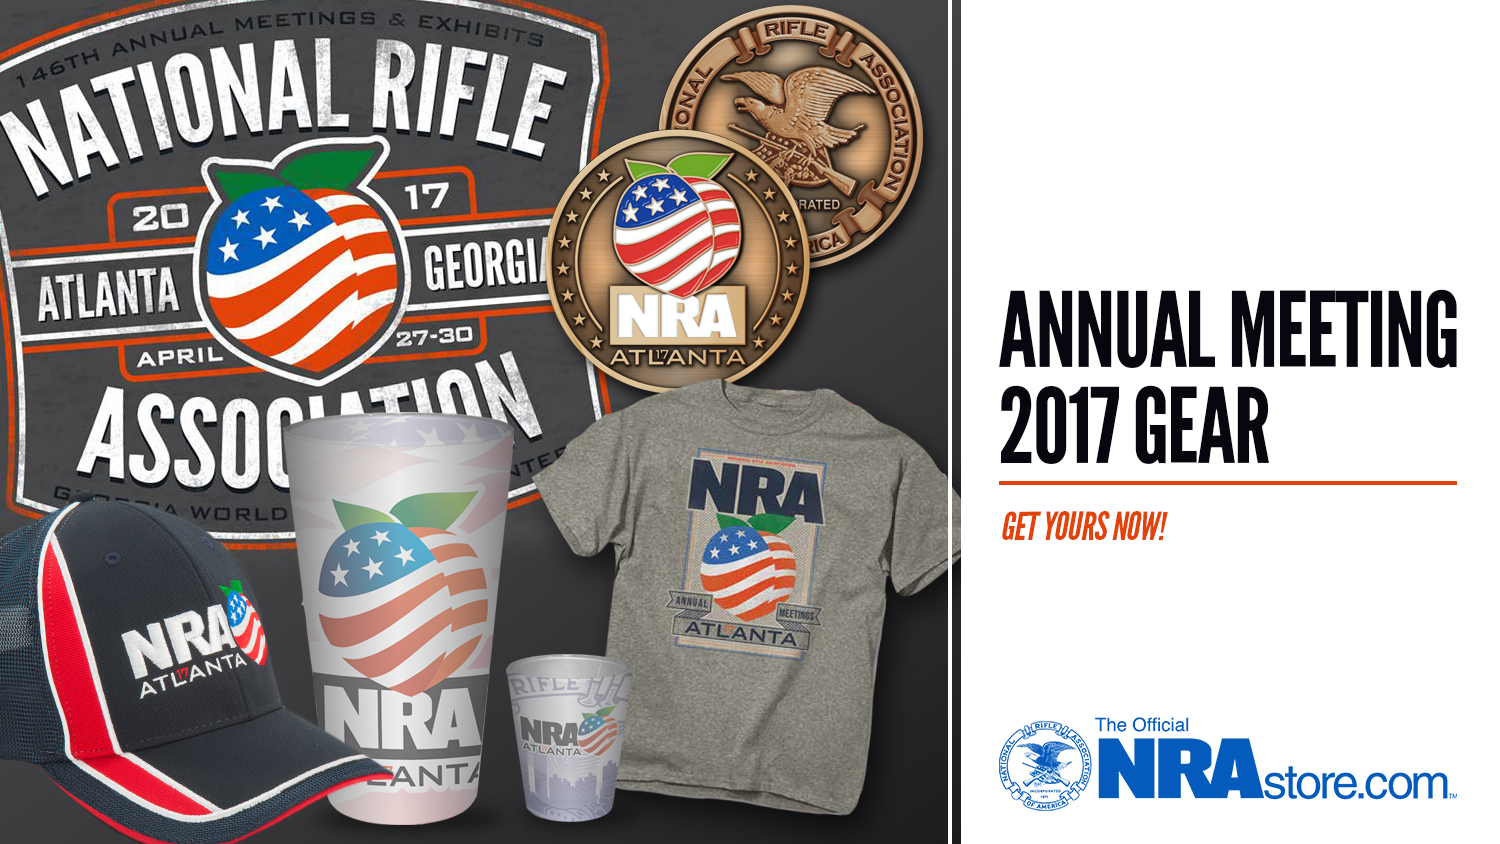 Get Your 2017 NRA Annual Meeting Gear In Atlanta